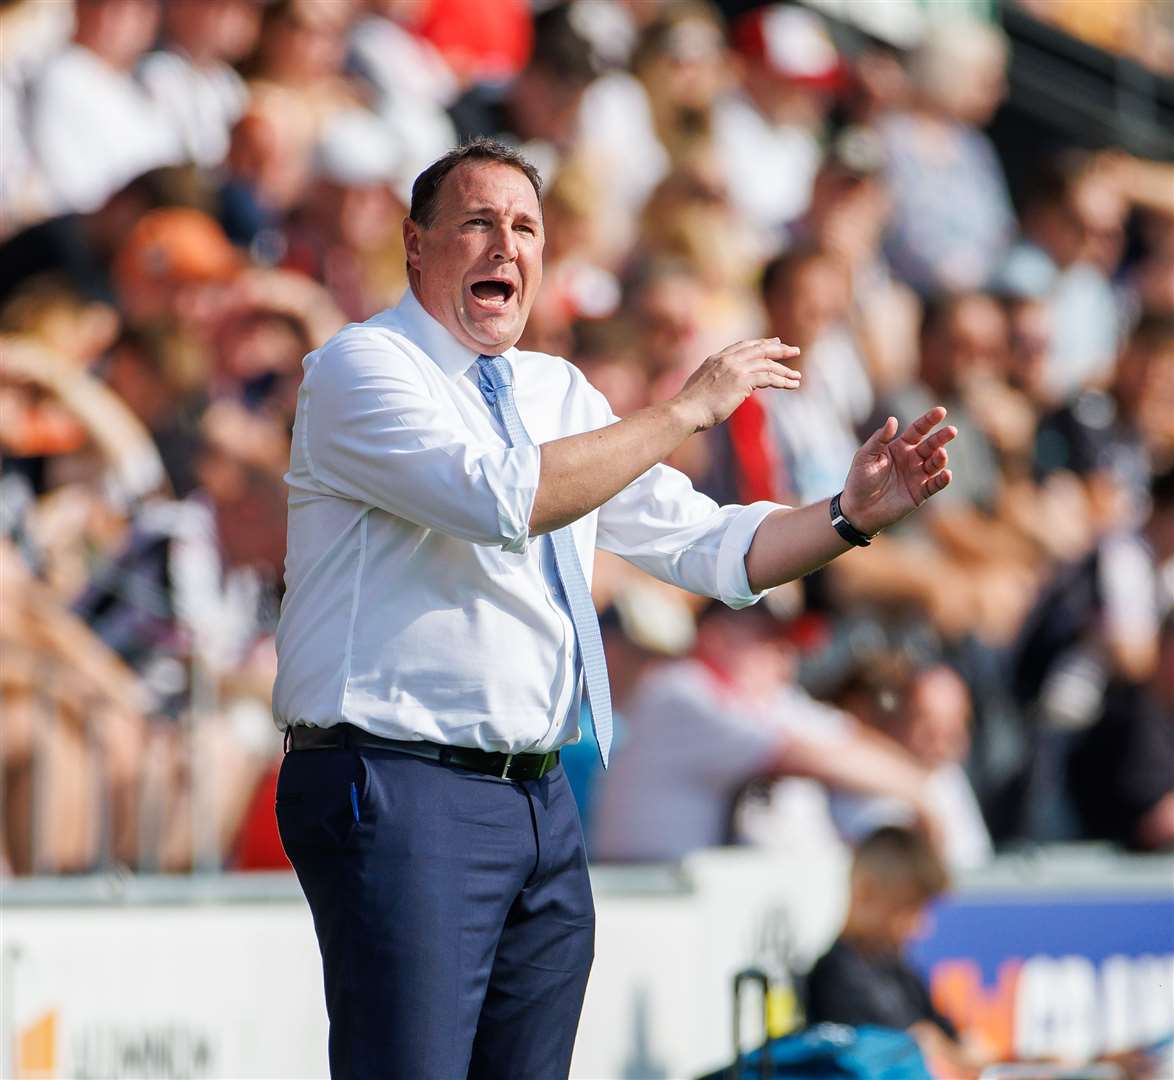 Malky Mackay says Hibernian will complicate transfer matters – but he is still hopeful of more new arrivals before the deadline.